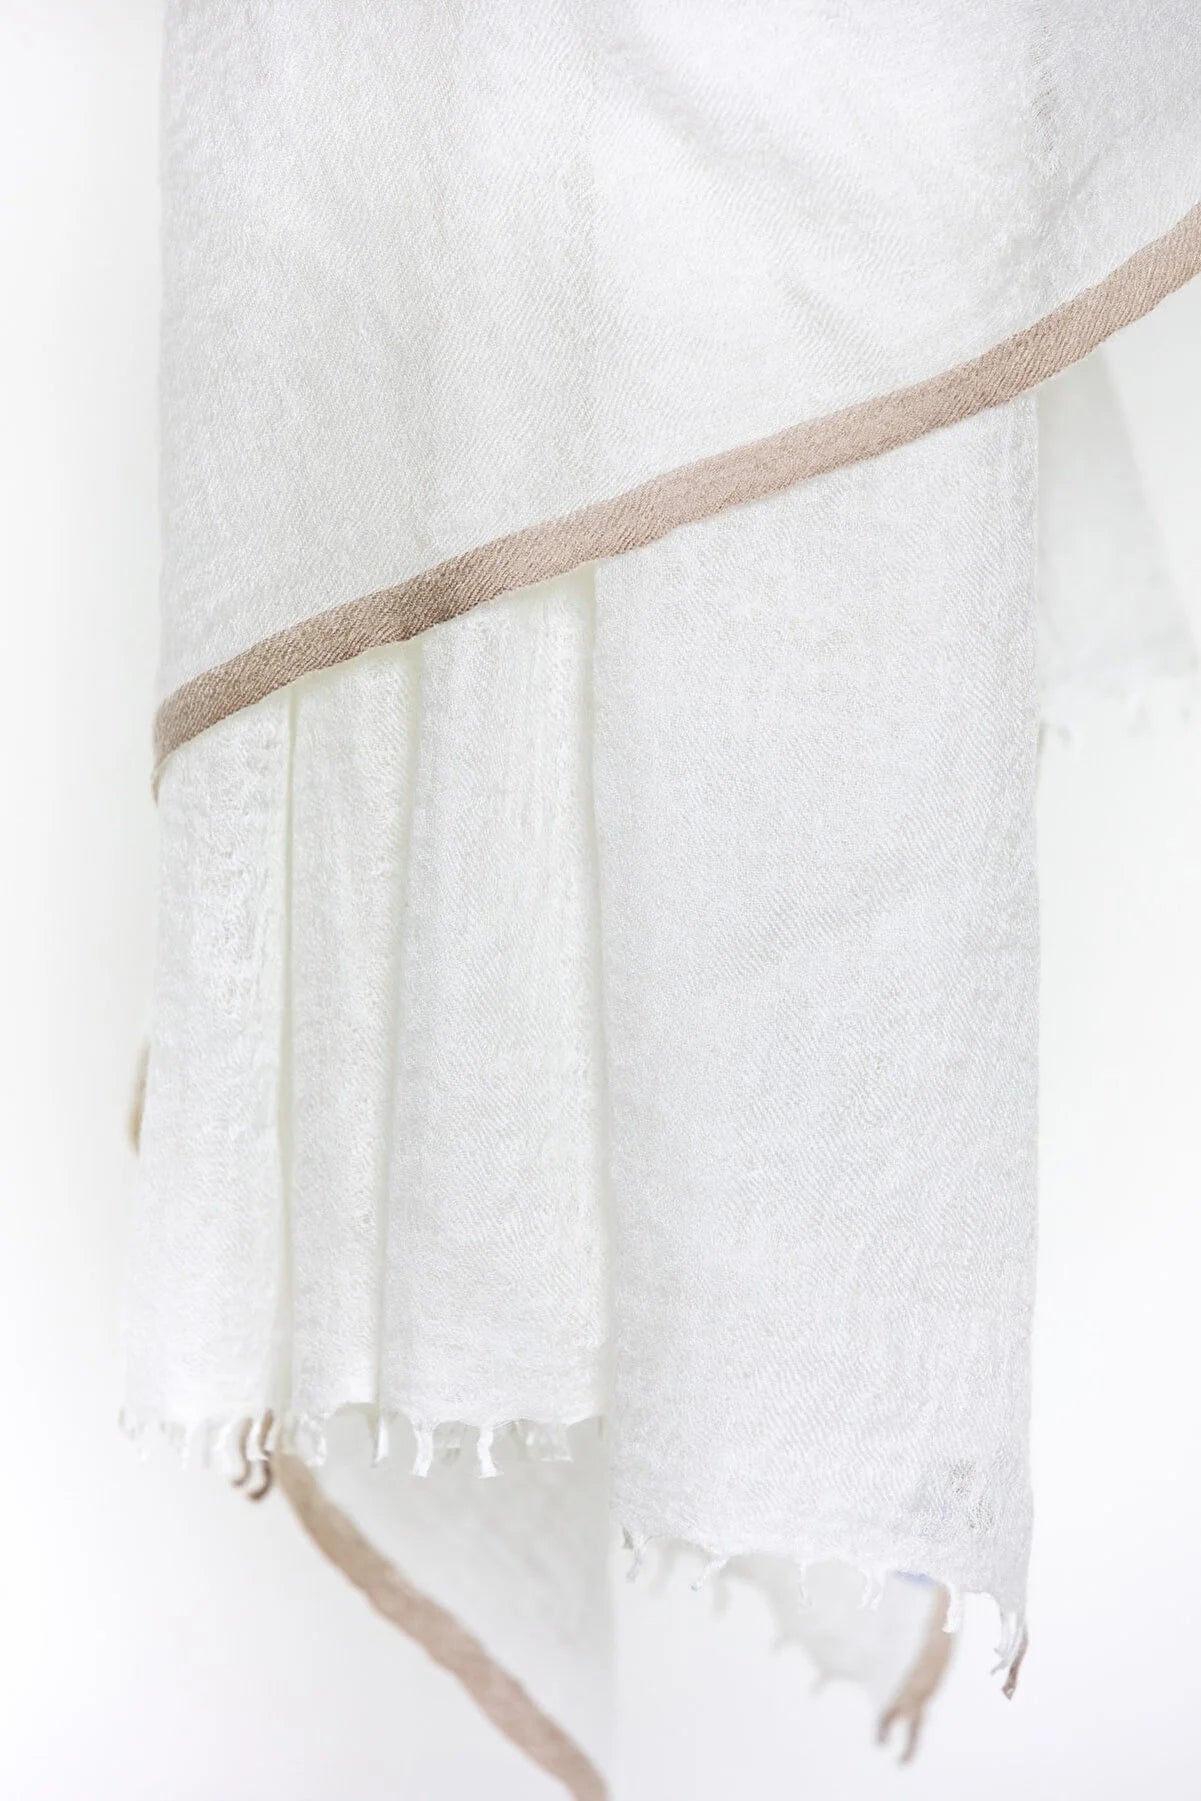 Bordered Sparge Baby Cashmere Shawl - Ivory Brown